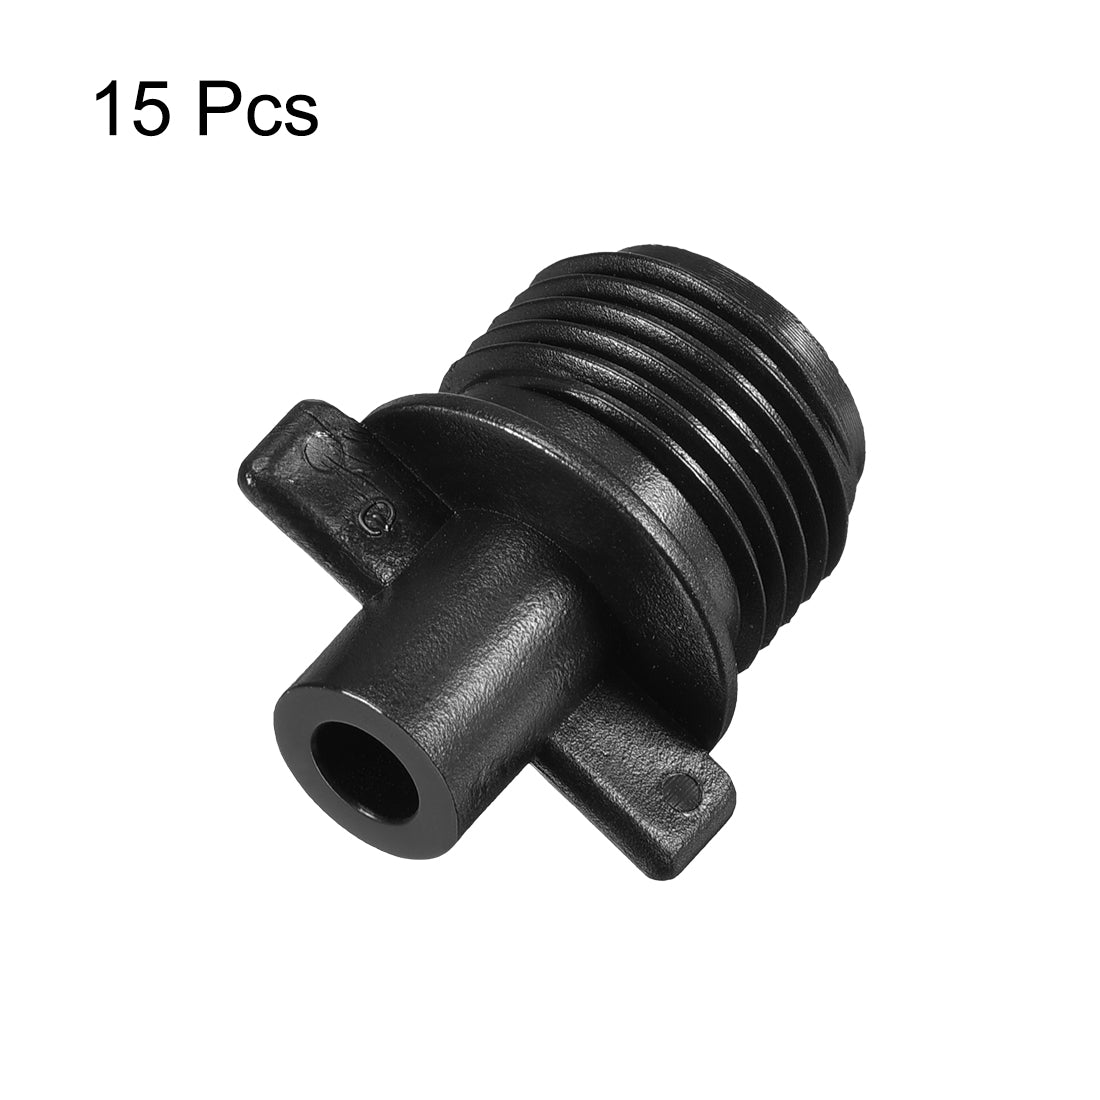 Uxcell Uxcell Barb Drip Pipe Connector G1/2 Male Thread 6mm OD Hose Fitting Plastic 15pcs